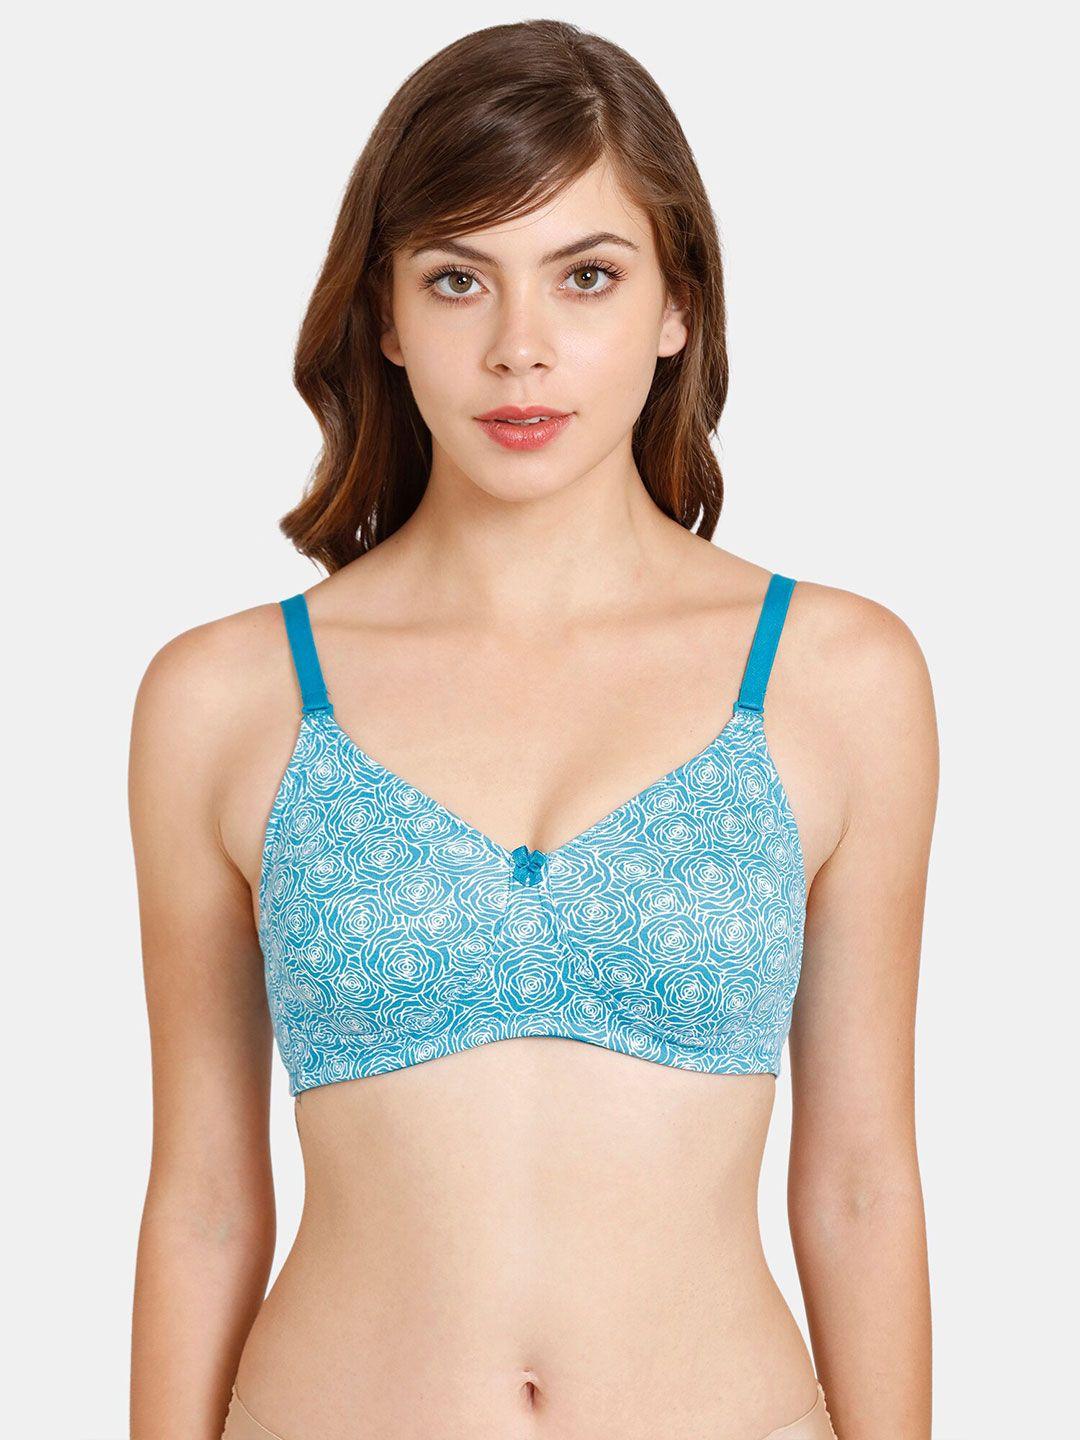 rosaline-by-zivame-blue-&-white-non-wired-&-non-padded-abstract-printed-bra